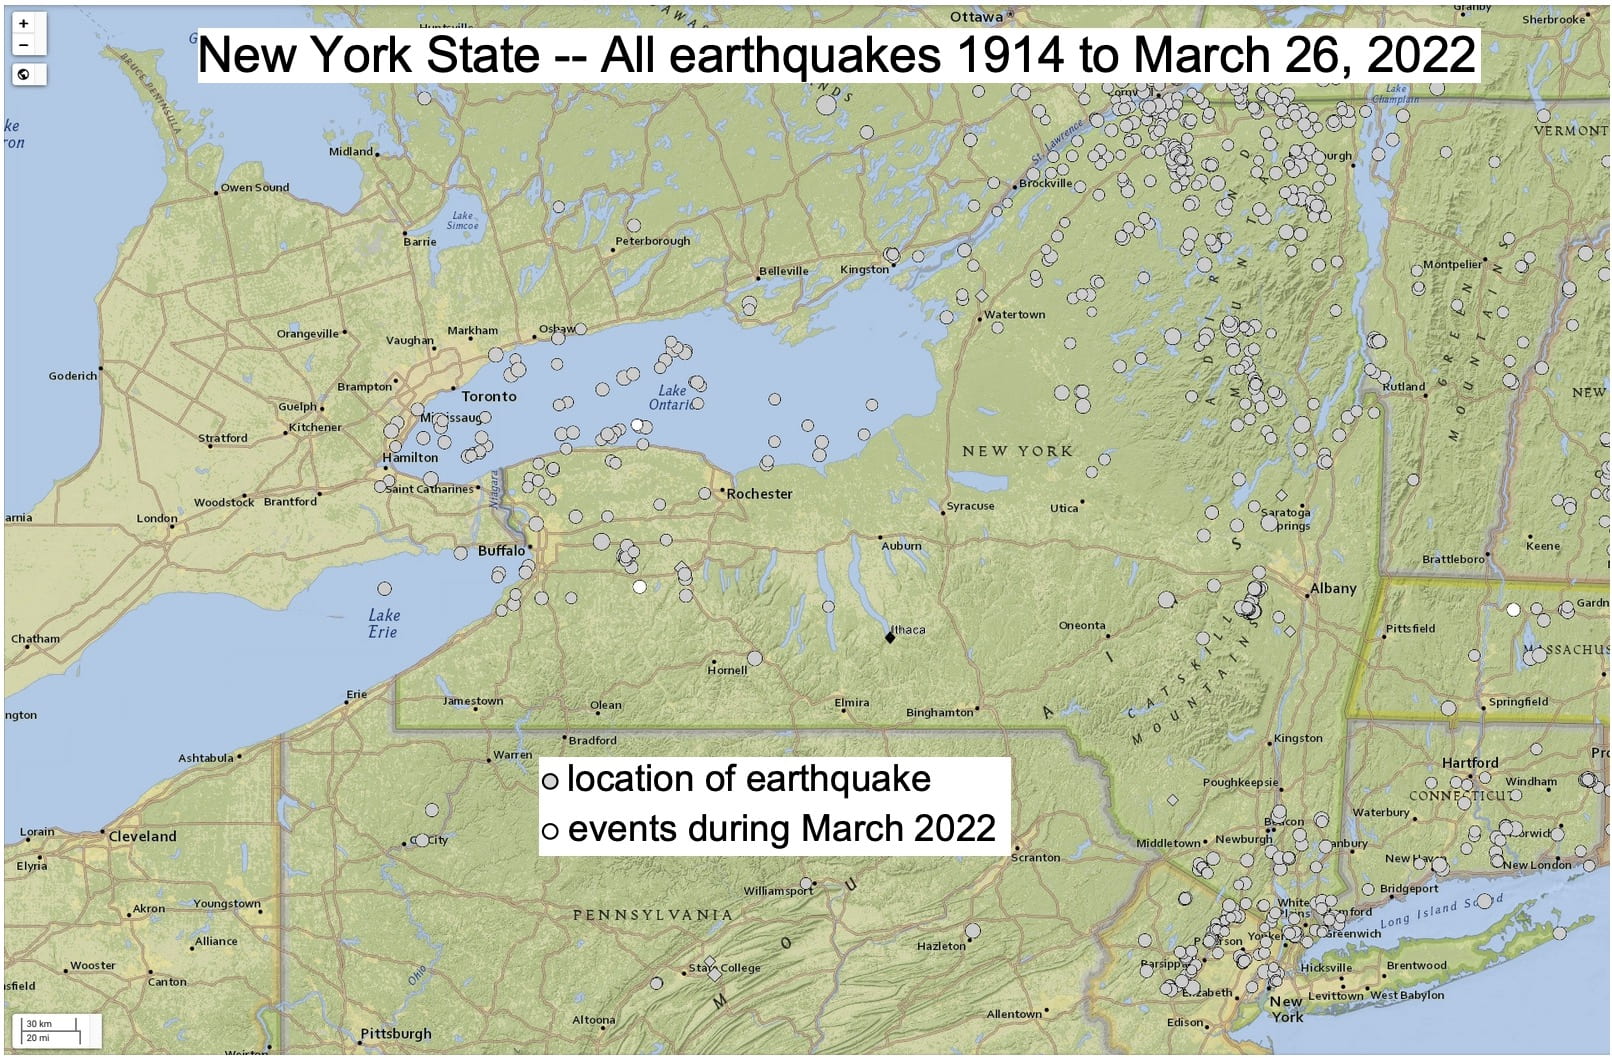 A map of the locations of all seismic events in and near New York State, between 1914 and March 26, 2022 is shown, based on data from the U.S. Geological Survey. Three areas have most of the earthquakes: first, between Buffalo and Rochester; second, around the northern, western and eastern margins of the Adirondack Mountains; third, near New York City.